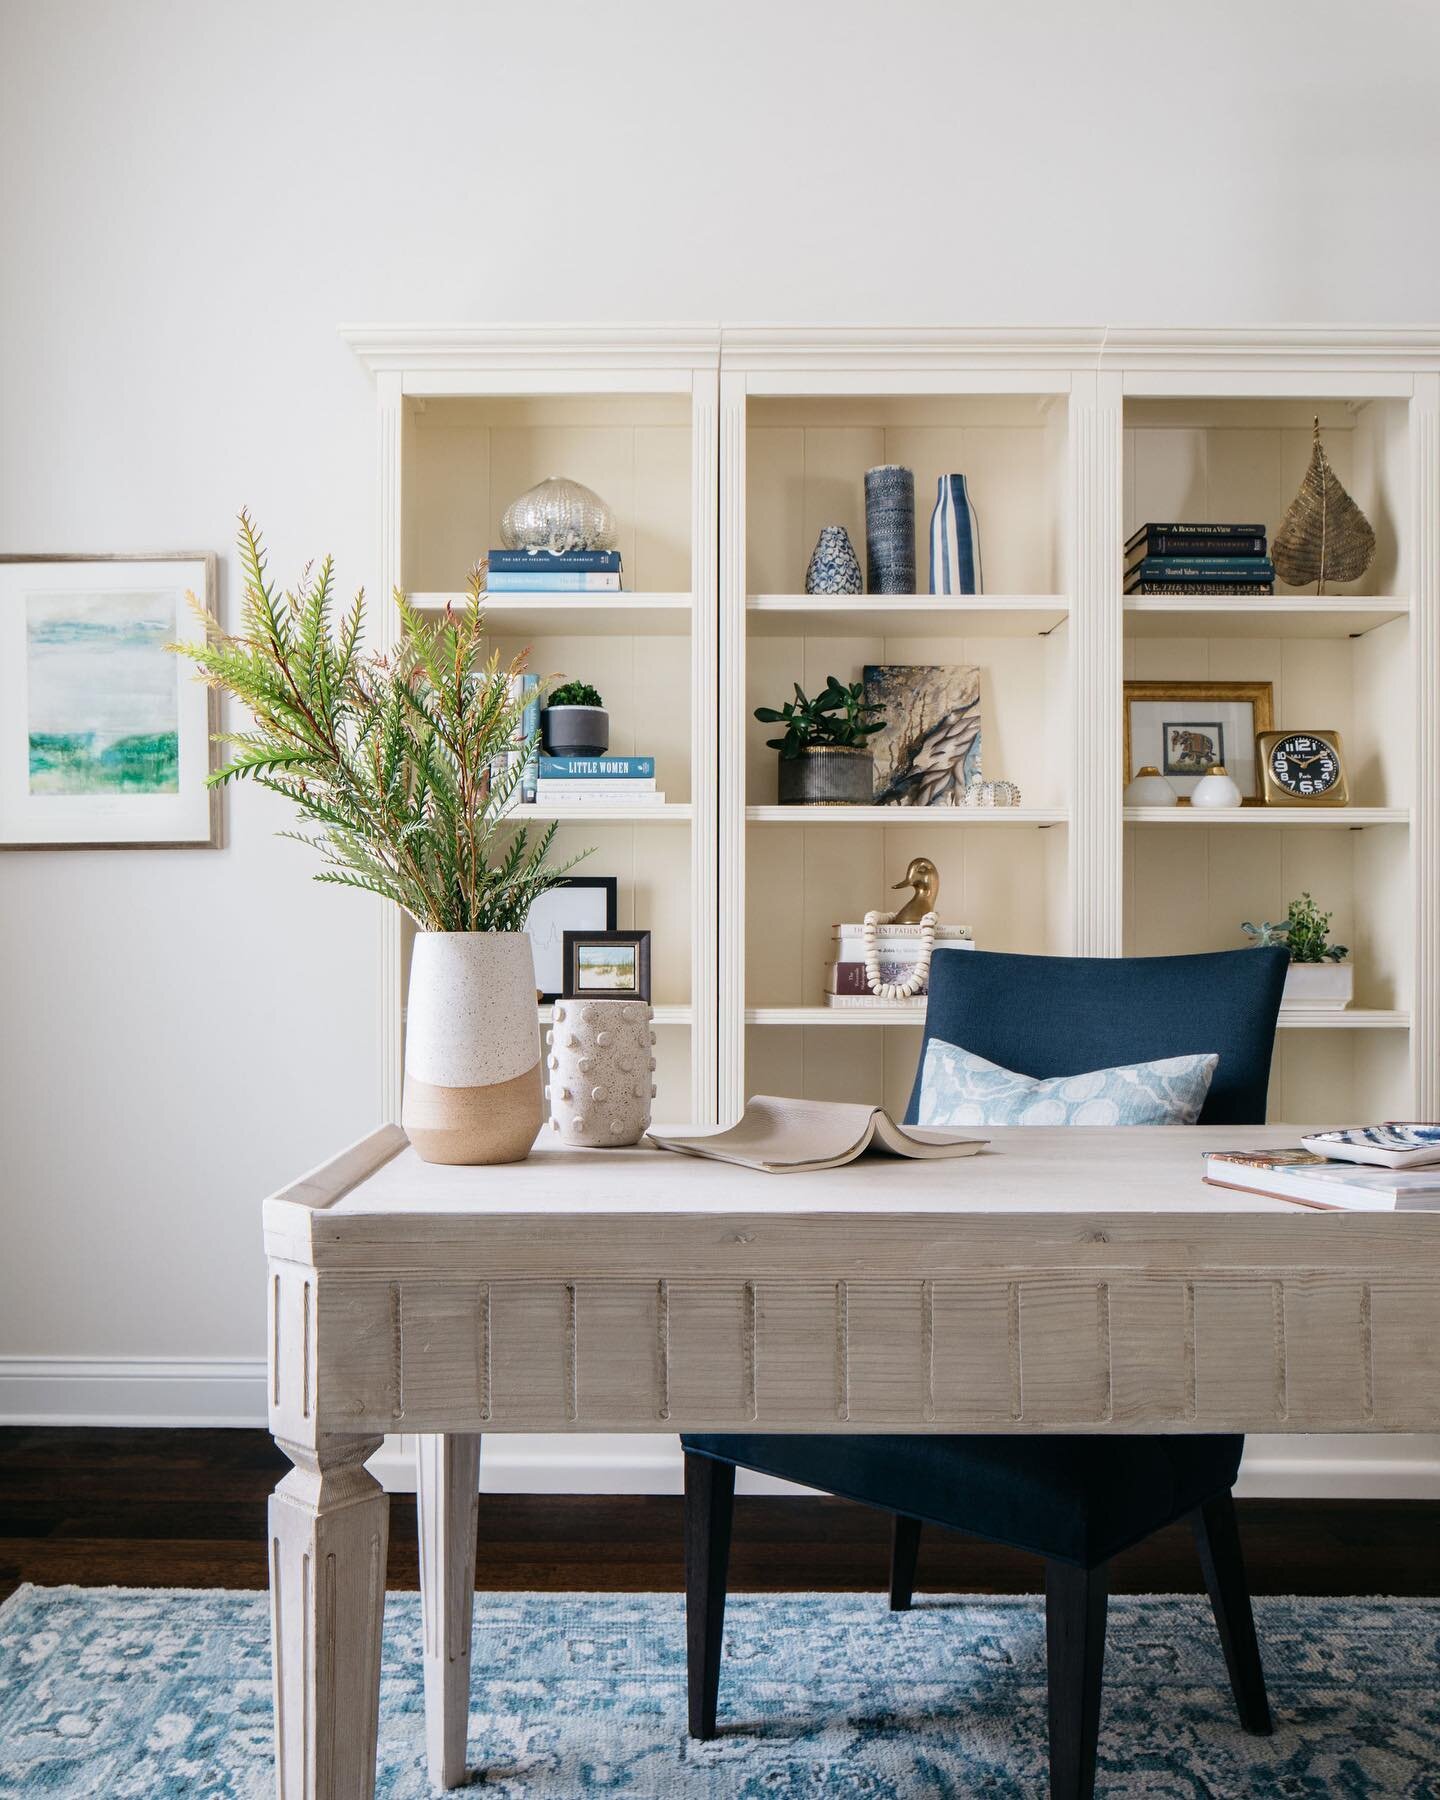 I&rsquo;ll be at my desk today catching up on emails, checking on orders and scheduling appointments.  Hoping my desk looks more like this one by the end of the day. 
Design: @interiorbloomsdesign
📷: @margaretrajic 
#mondaygoals #homeofficedesign